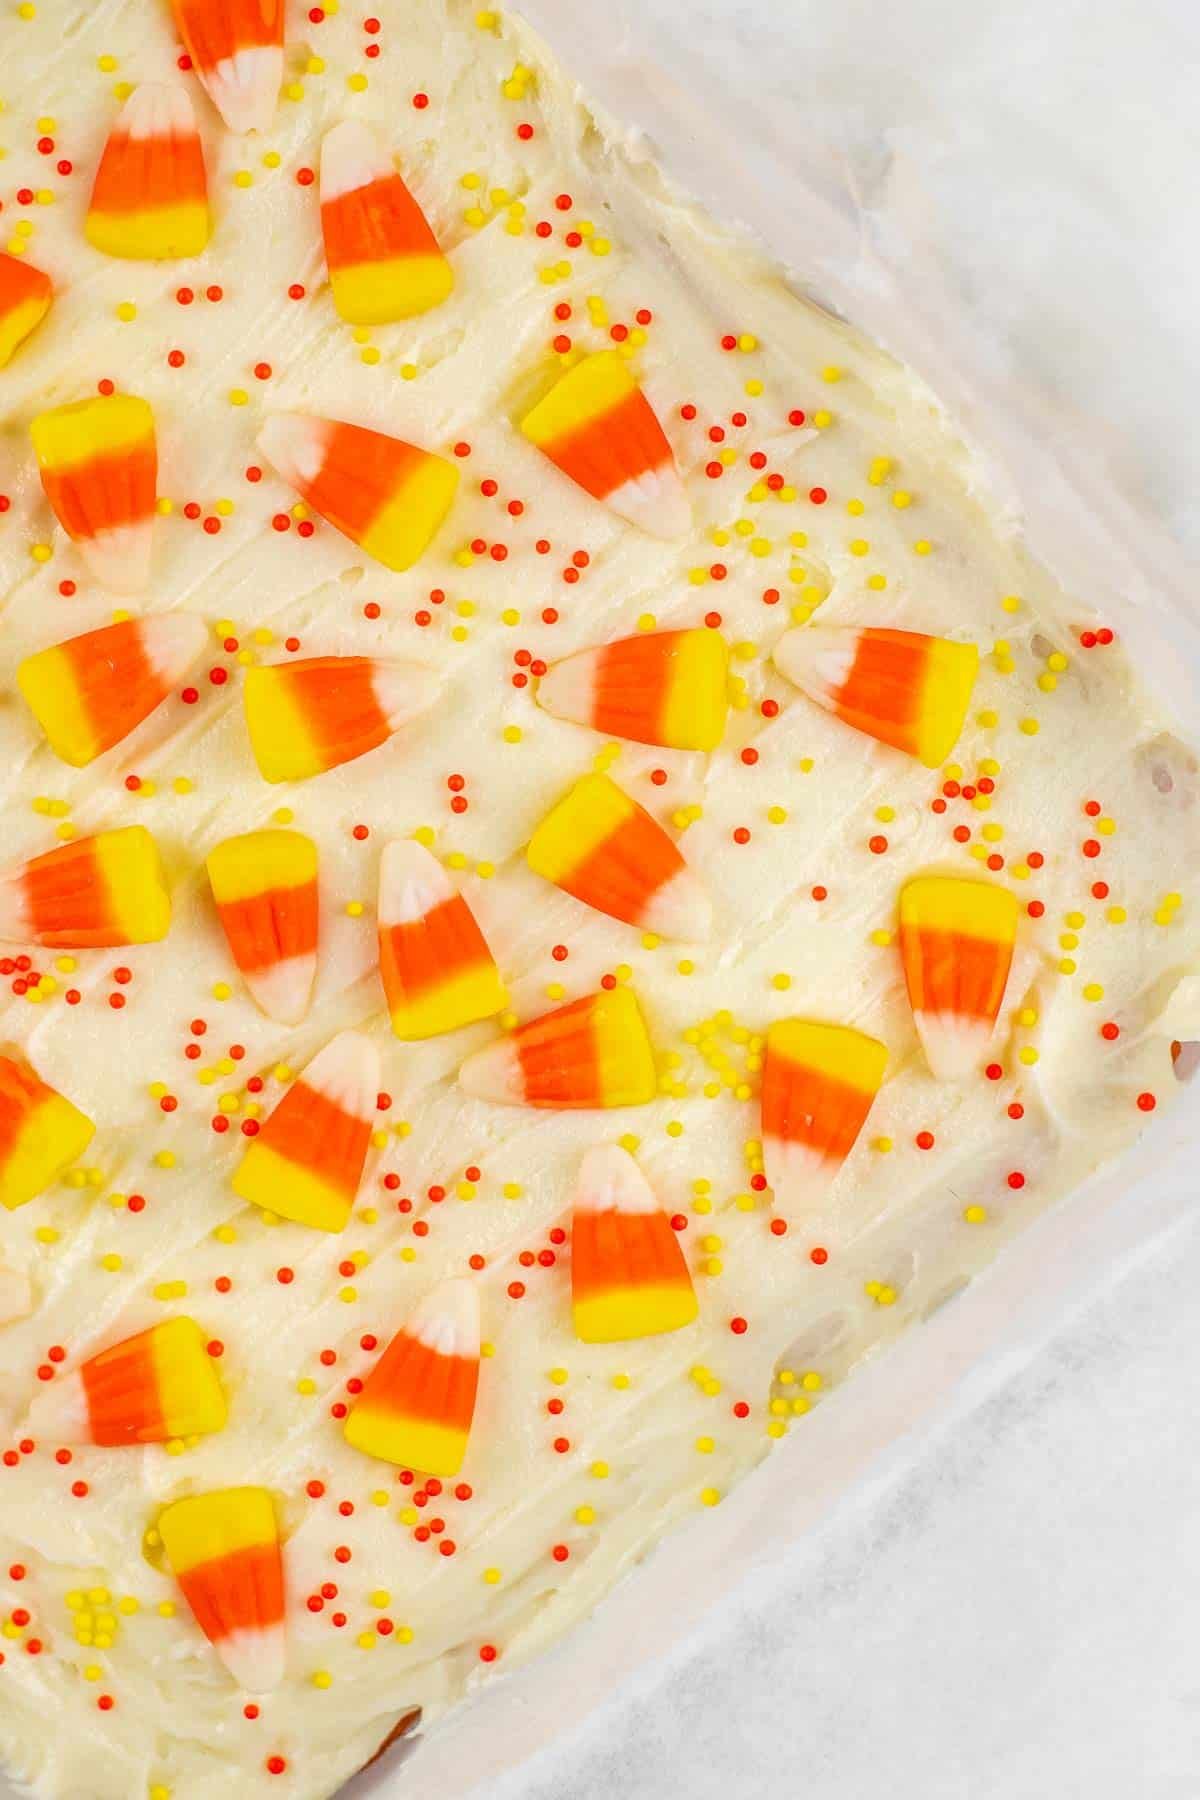 candy corn and orange and yellow sprinkles on white frosting in a square baking dish.